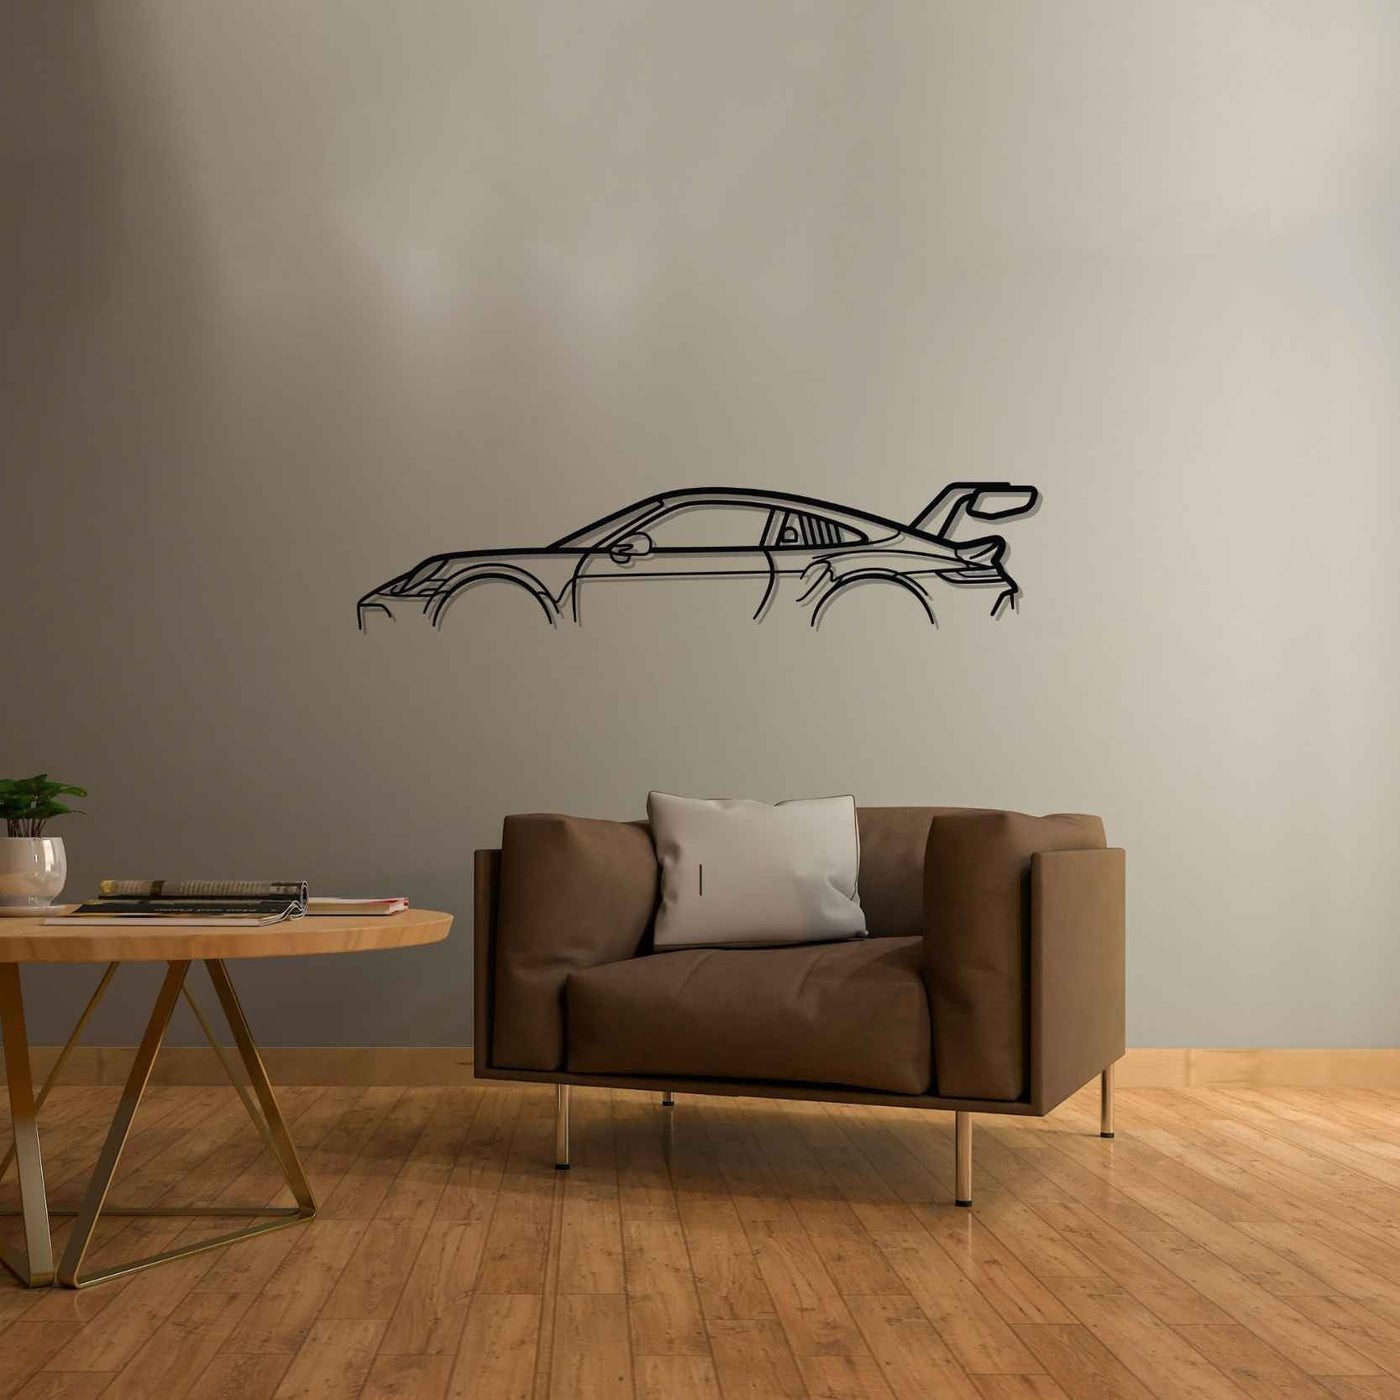 911 GT3 CUP Model 992 Classic Metal Silhouette Wall Art